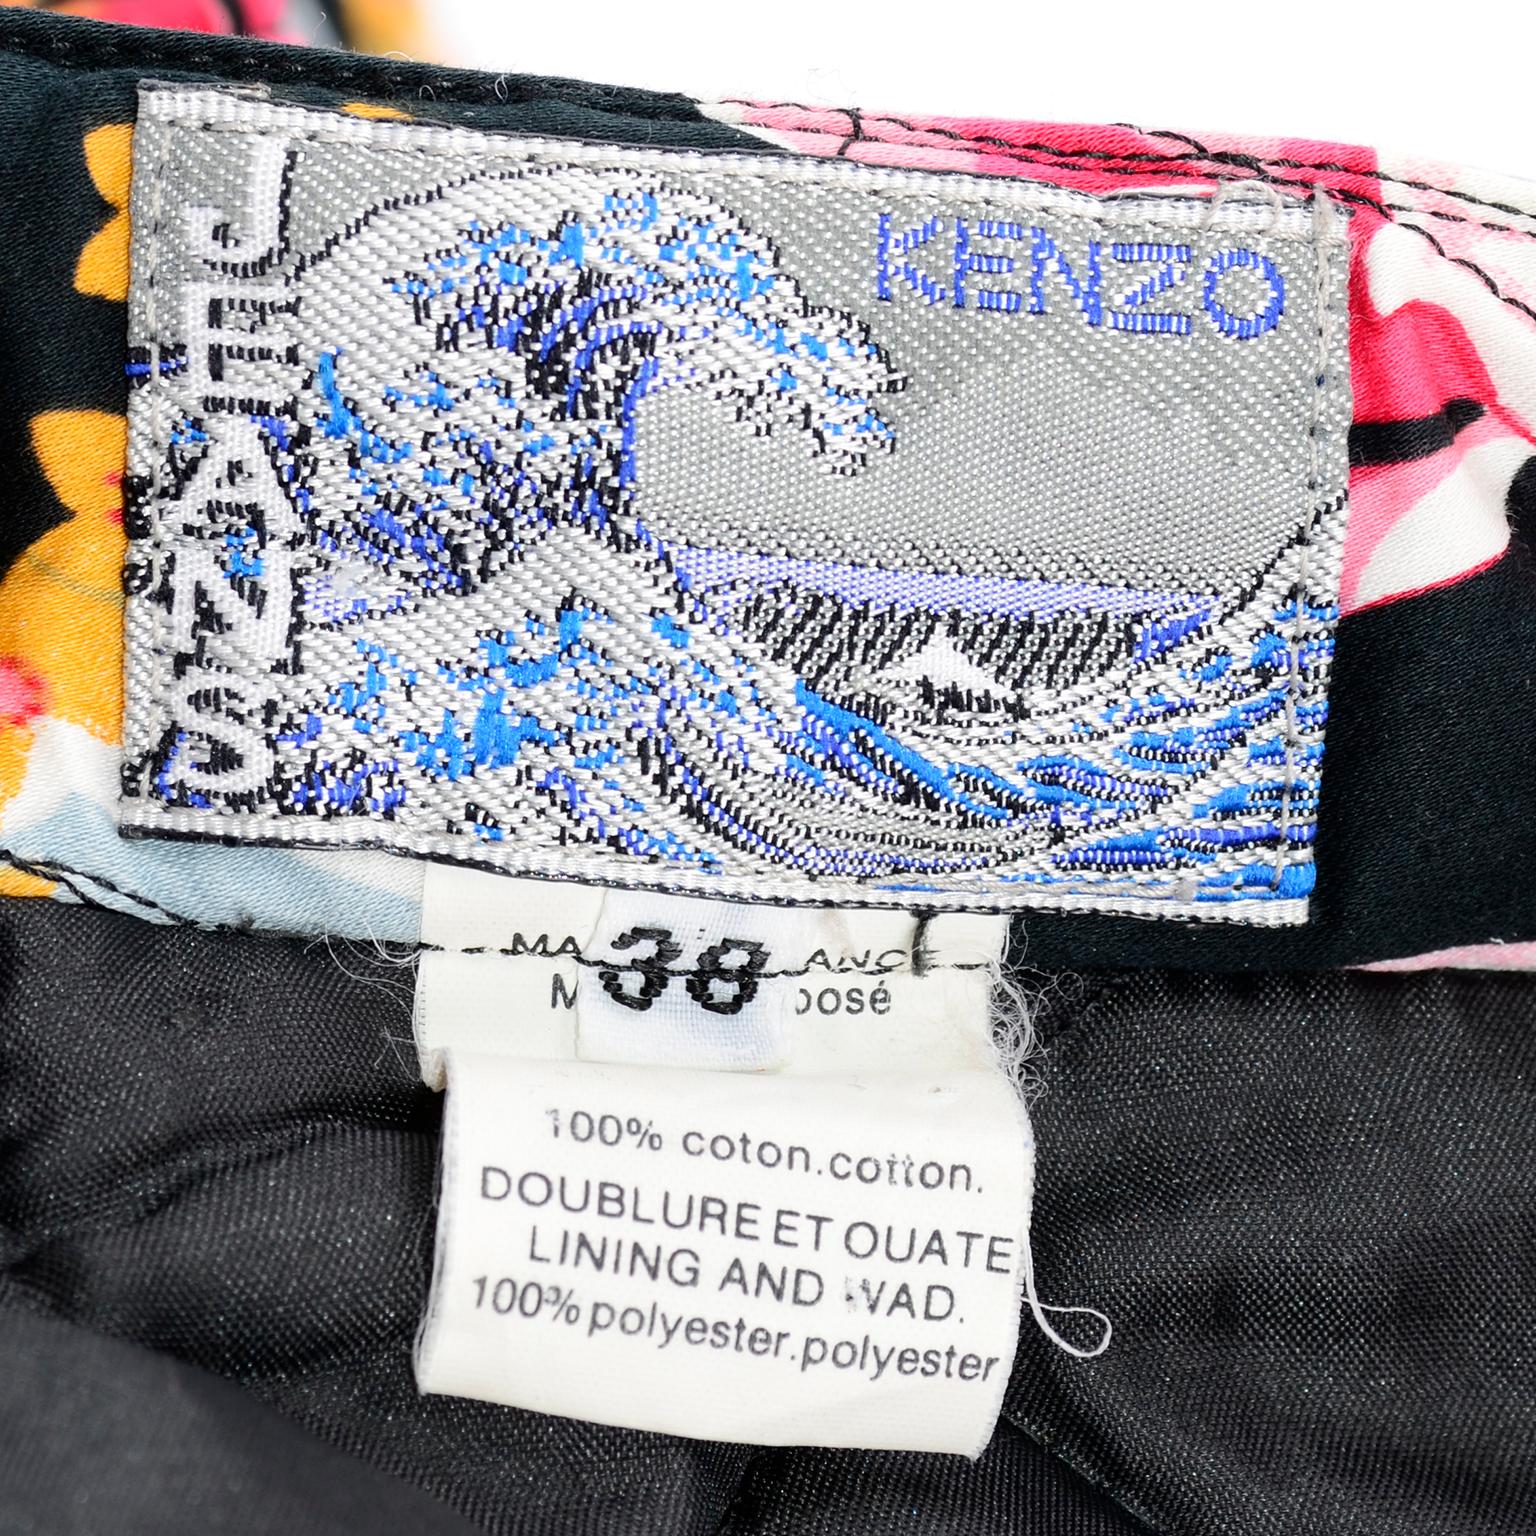 Vintage 20th Century Kenzo Jeans Colorful Floral Quilted High Waisted Pants For Sale 3